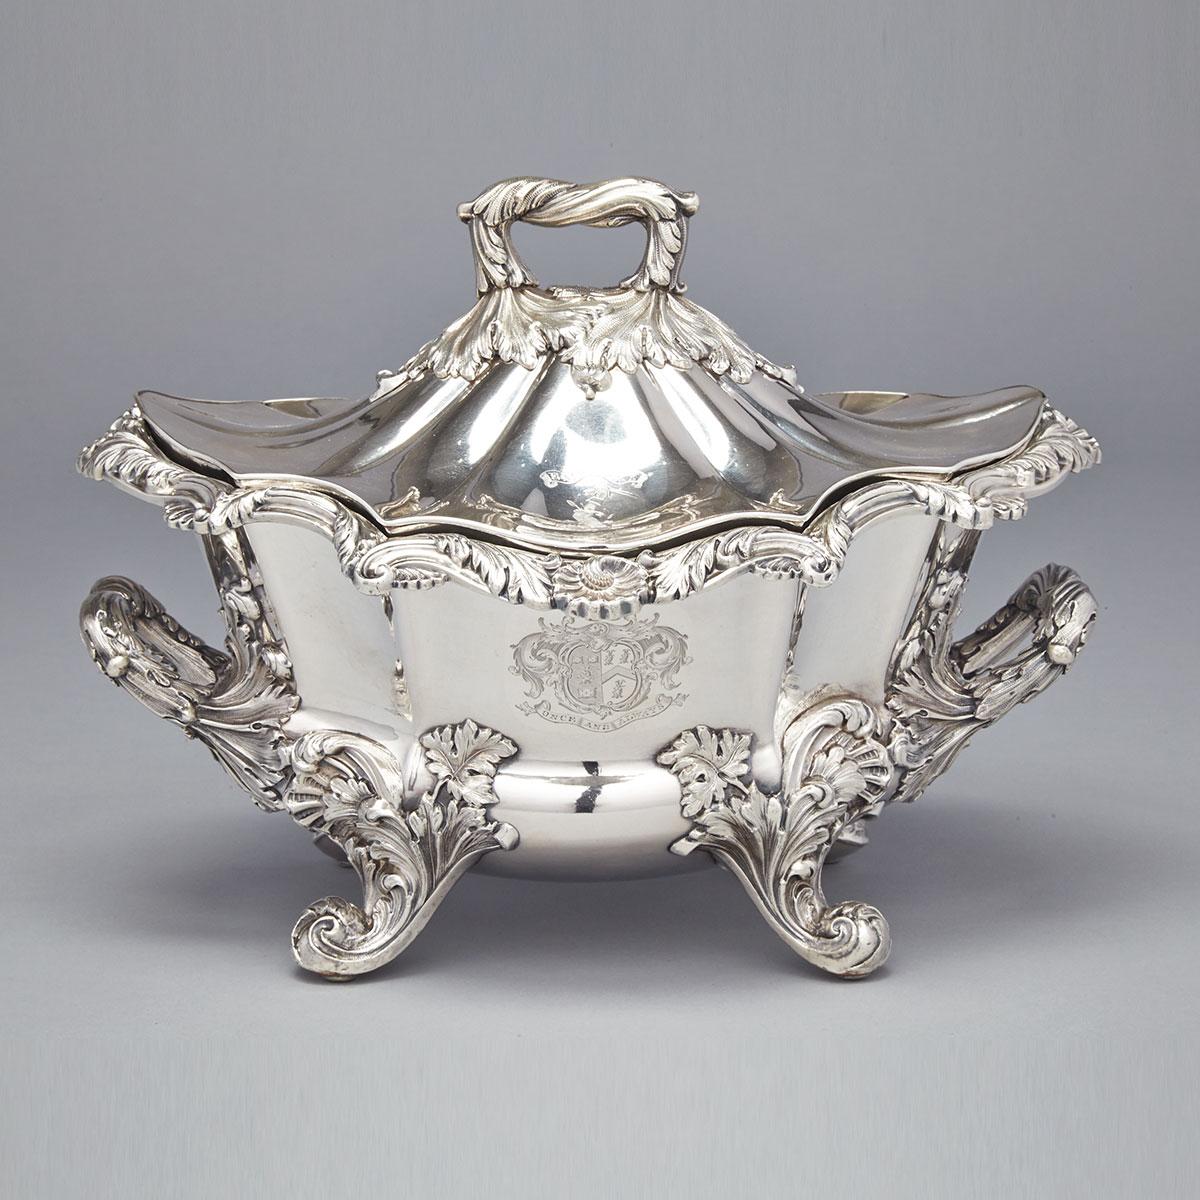 Old Sheffield Plate Covered Soup Tureen, Matthew Boulton, c.1830